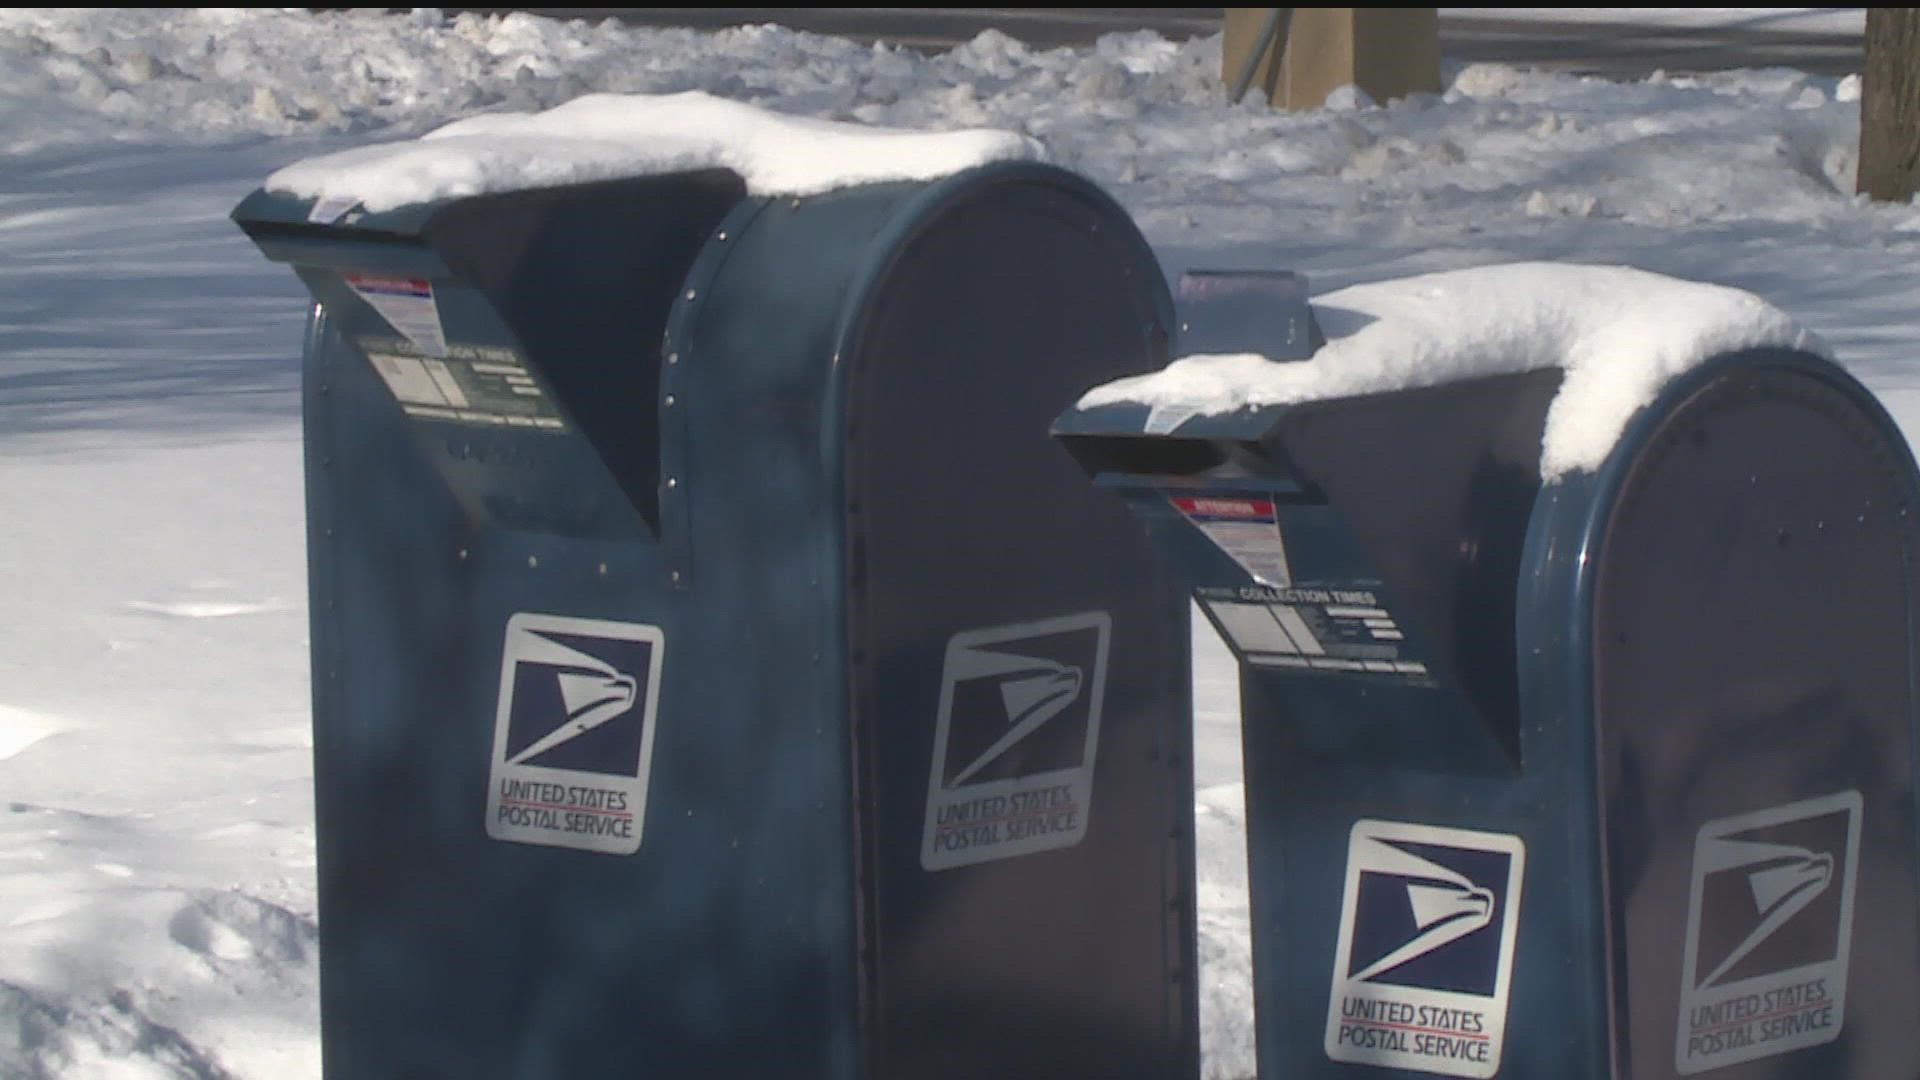 UPS, FedEx and the post office each have some last-minute shipping options, but officials say it's always possible a storm could get in the way of quick deliveries.